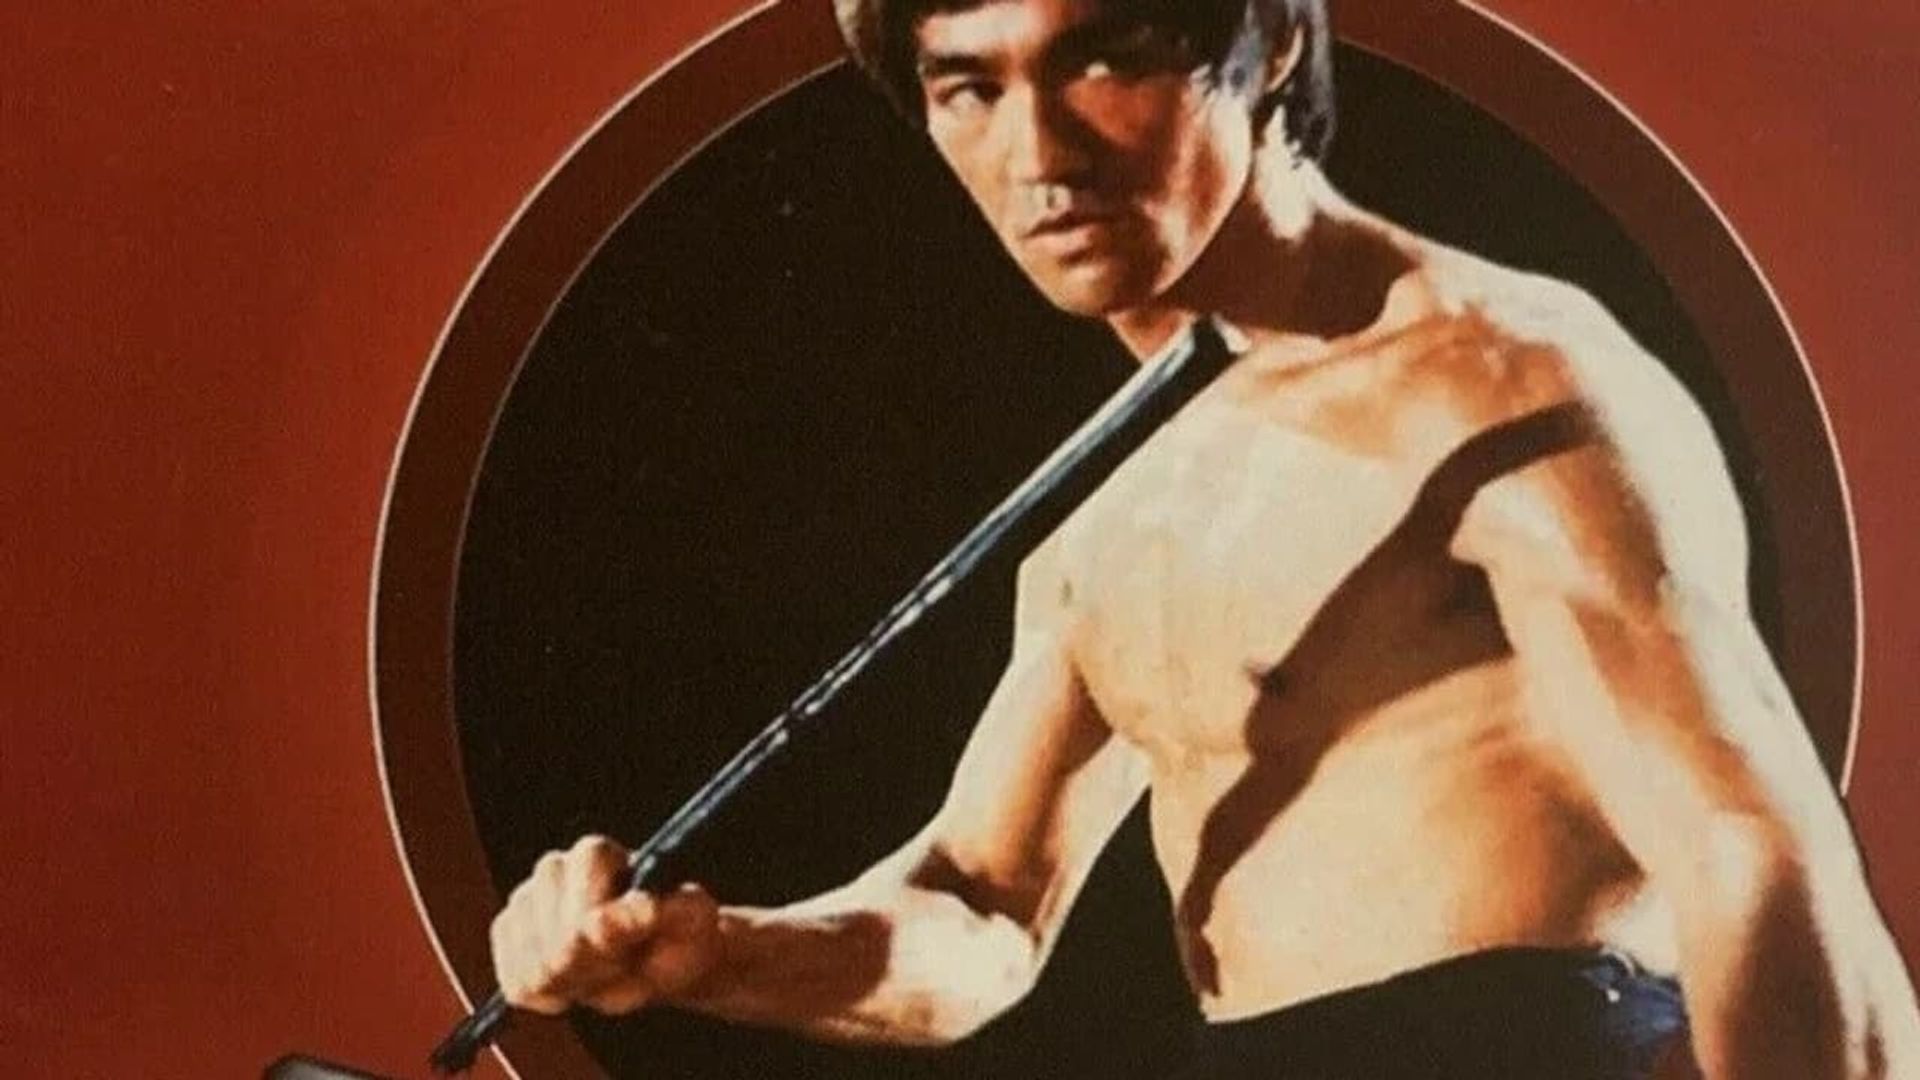 Bruce Lee: The Little Dragon background